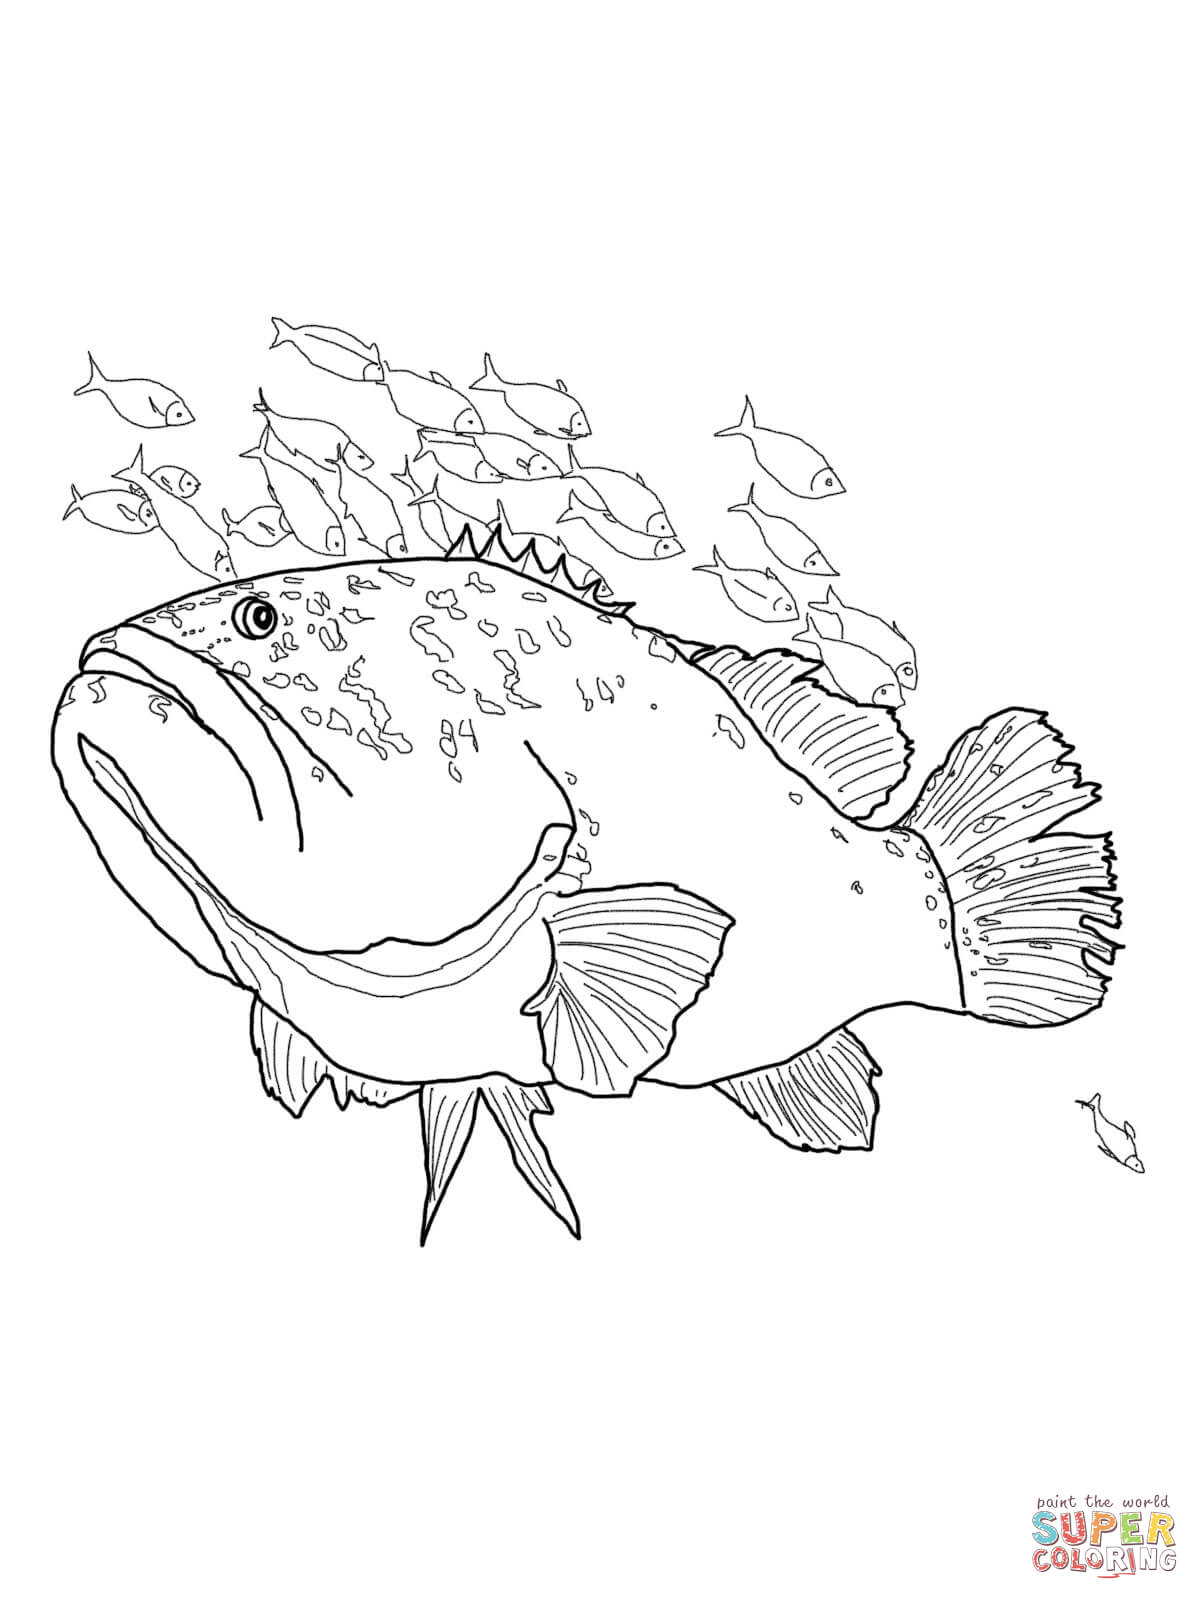 Grouper coloring #8, Download drawings